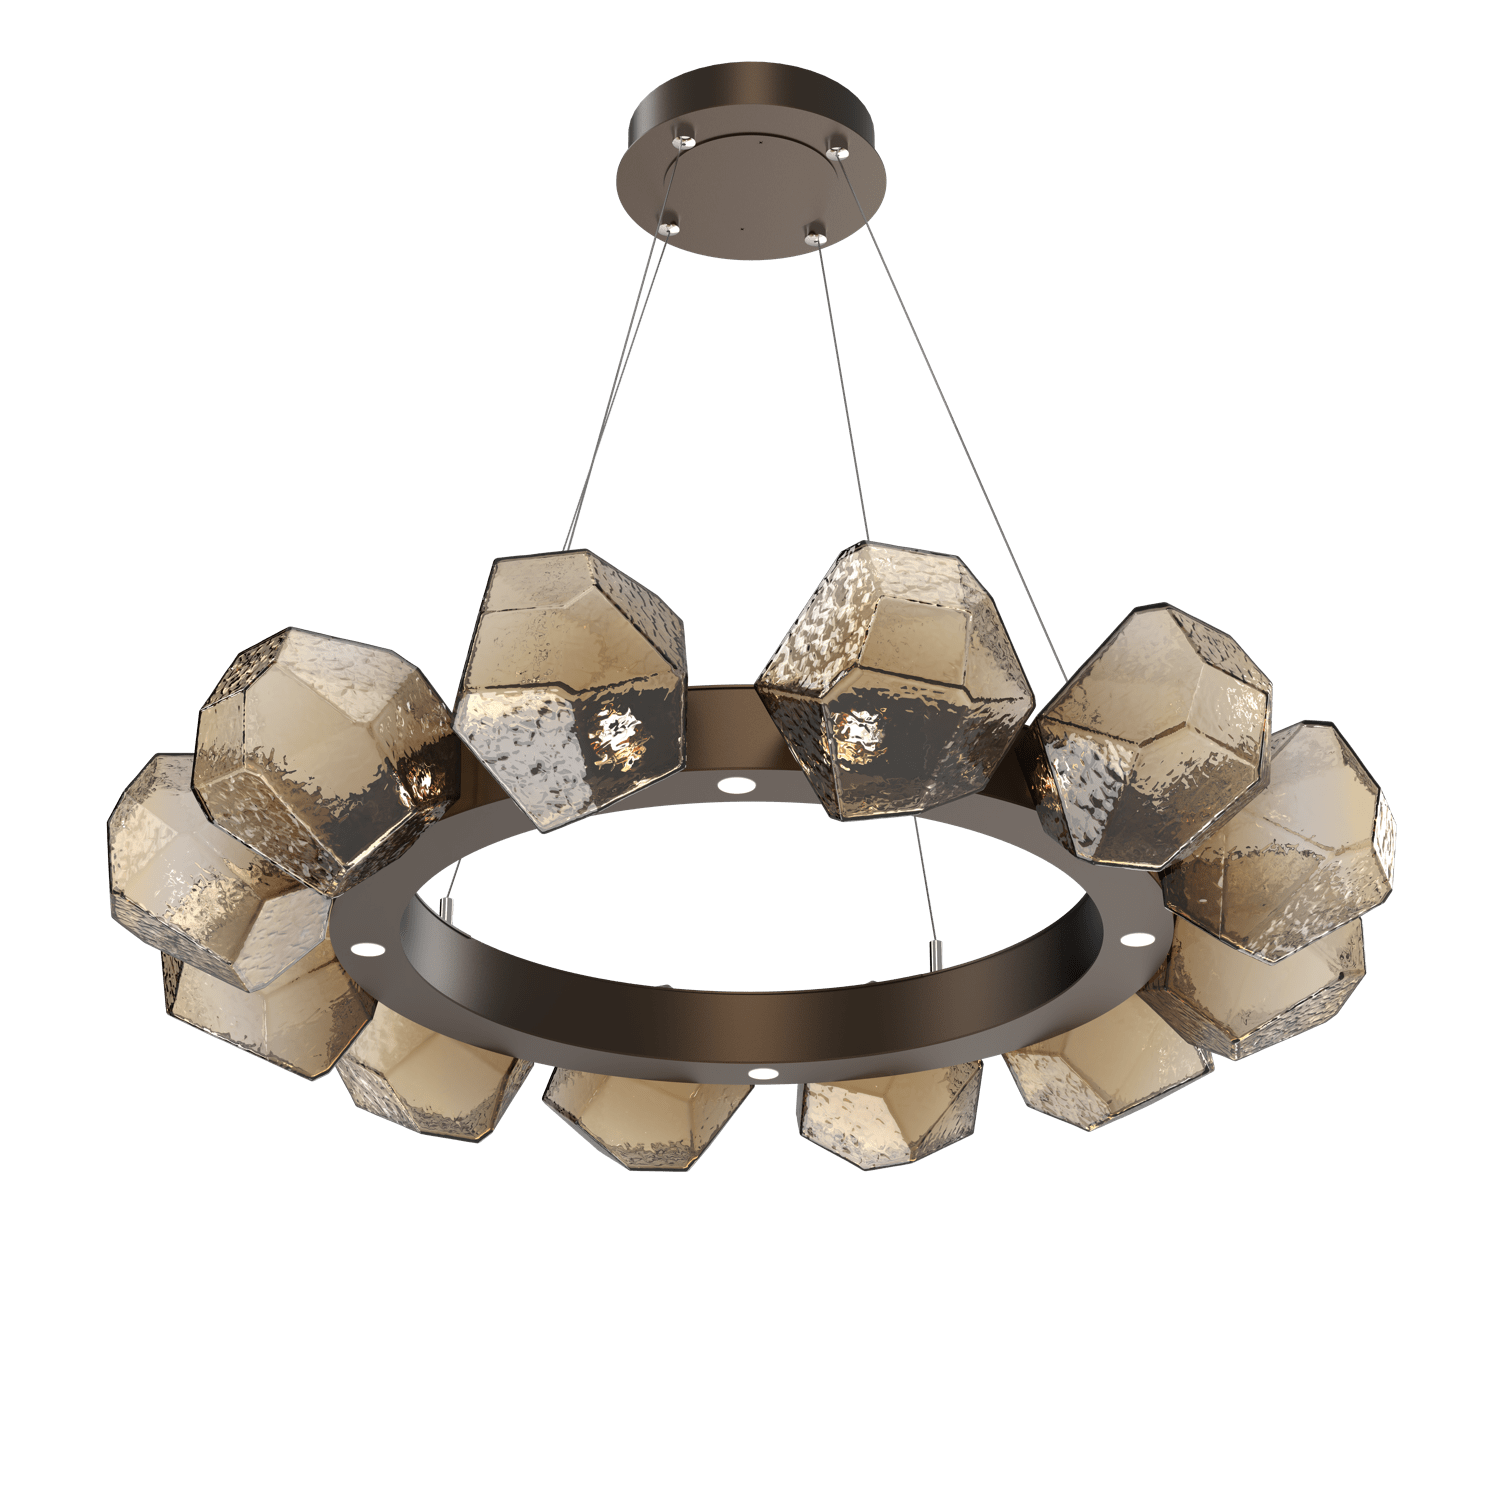 CHB0039-36-FB-B-Hammerton-Studio-Gem-36-inch-radial-ring-chandelier-with-flat-bronze-finish-and-bronze-blown-glass-shades-and-LED-lamping